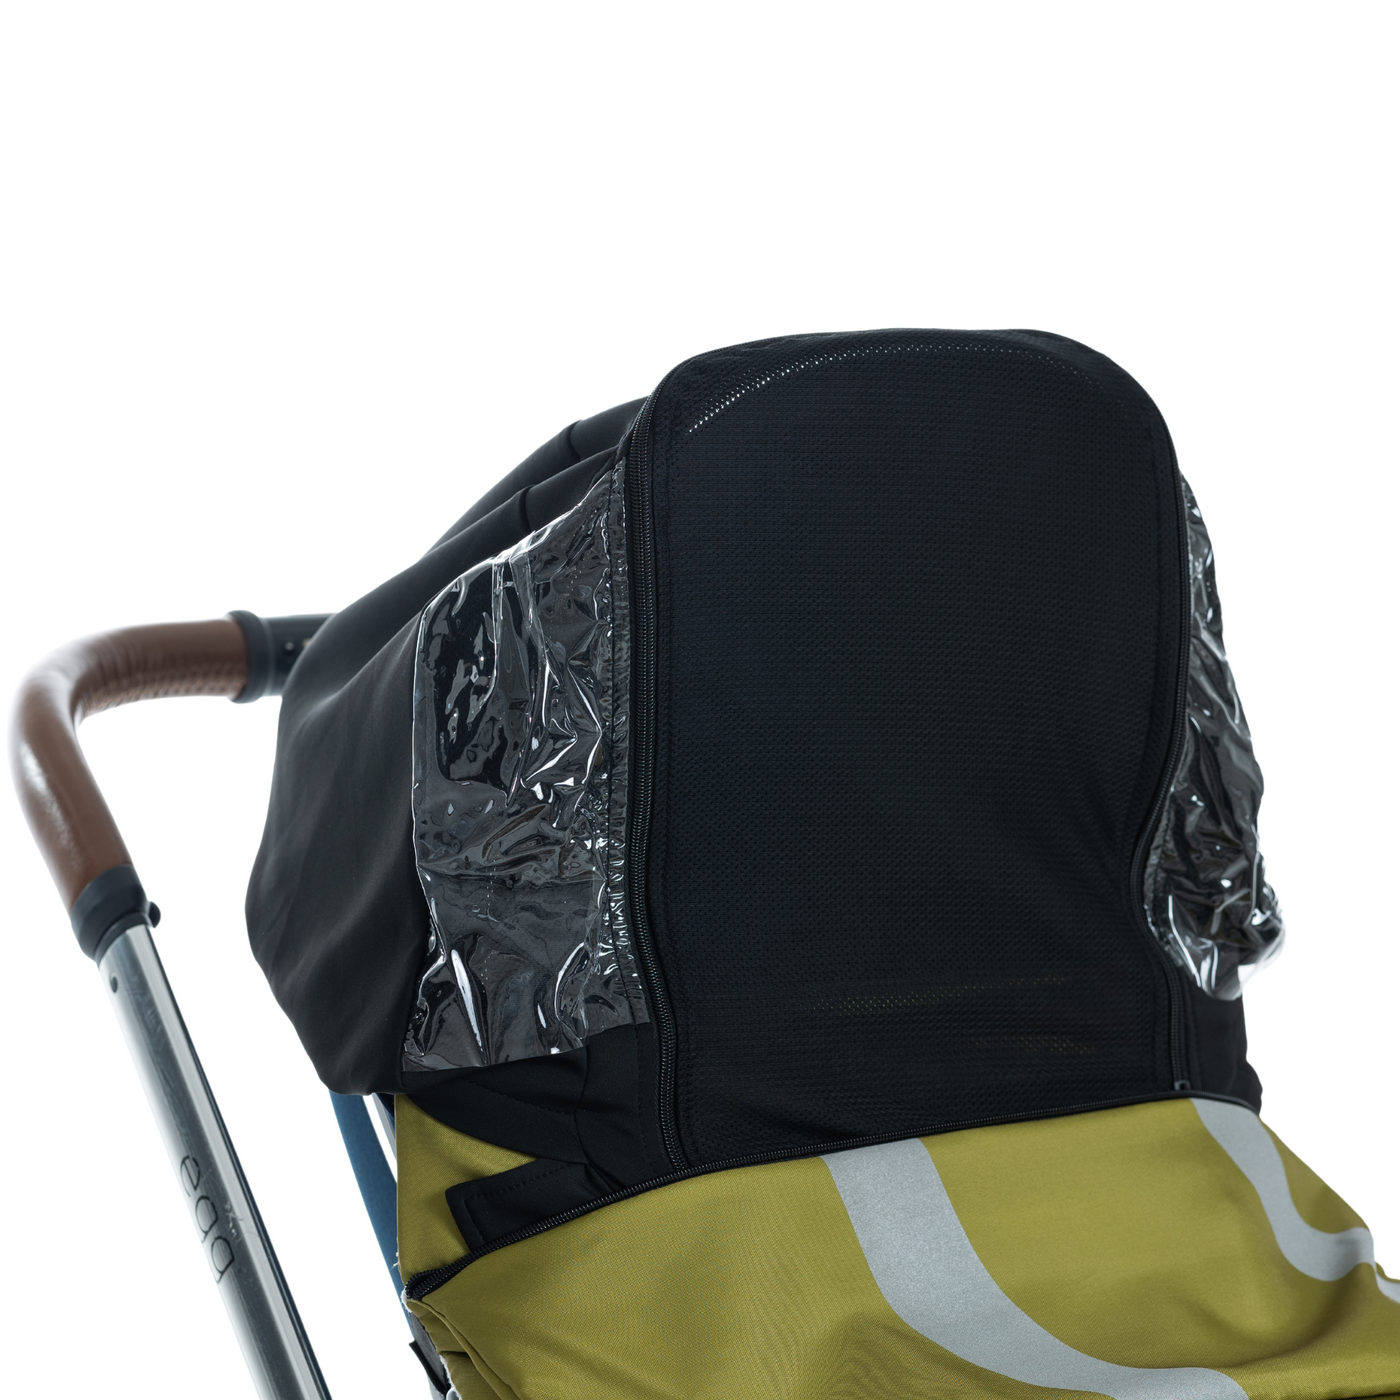 BlinkyWarm in Olive with sun shade in use on stroller